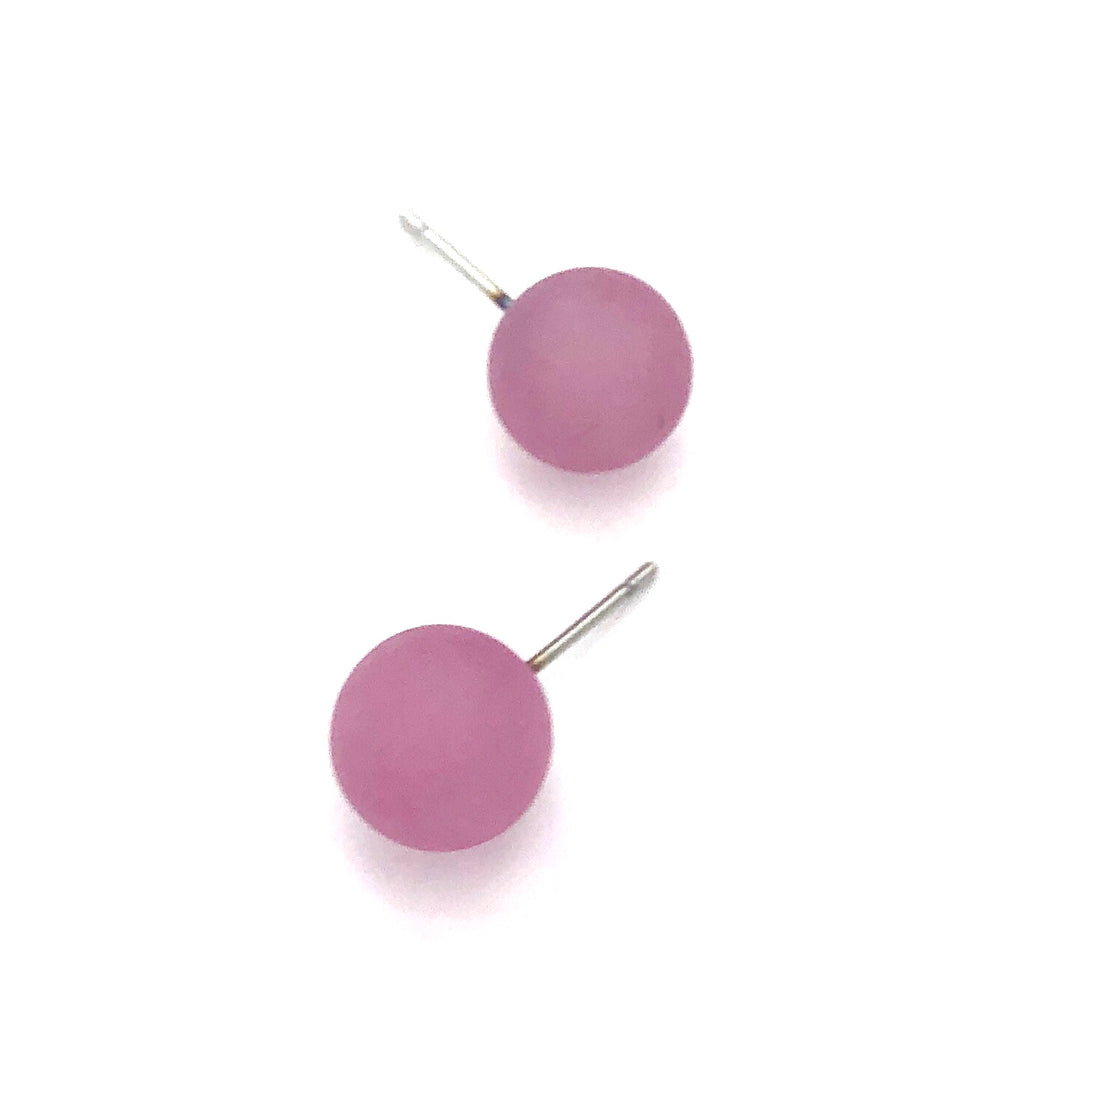 Amethyst Petite Frosted Lucite Ball Stud Earrings